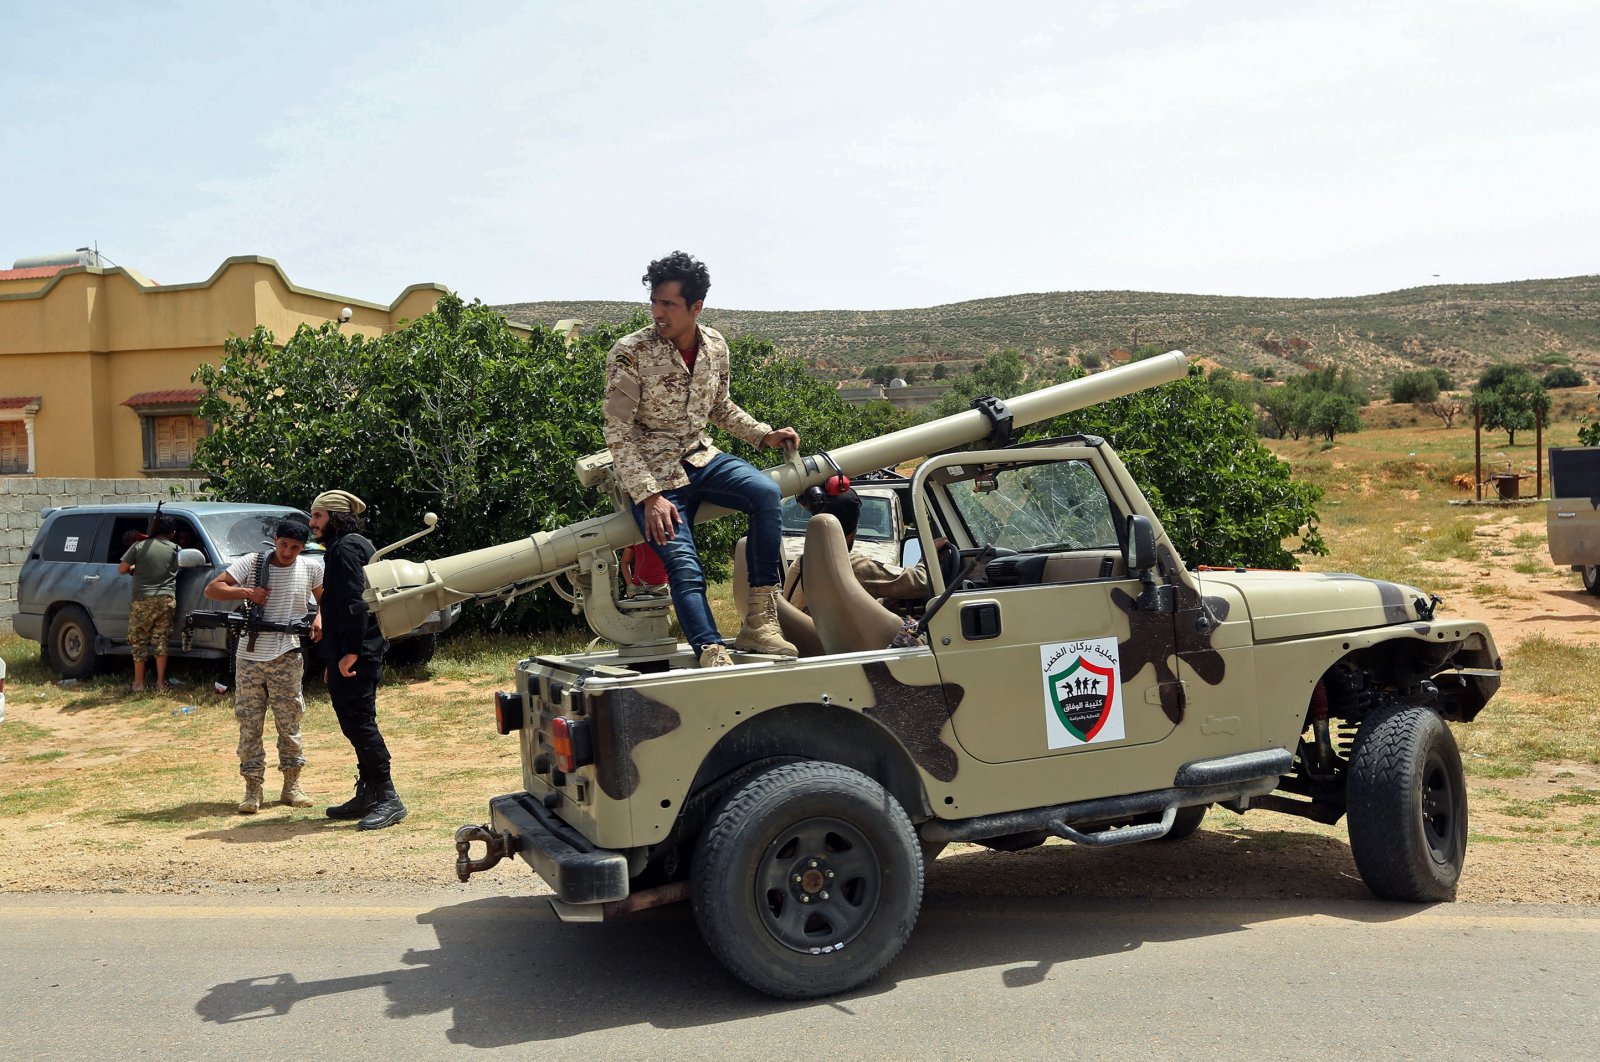 Fighters with Libya's UN-recognised Government of National Accord (GNA) gather at a position near the town of Garabulli, some 70 kms east of the capital Tripoli on April 19, 2020. (AFP)